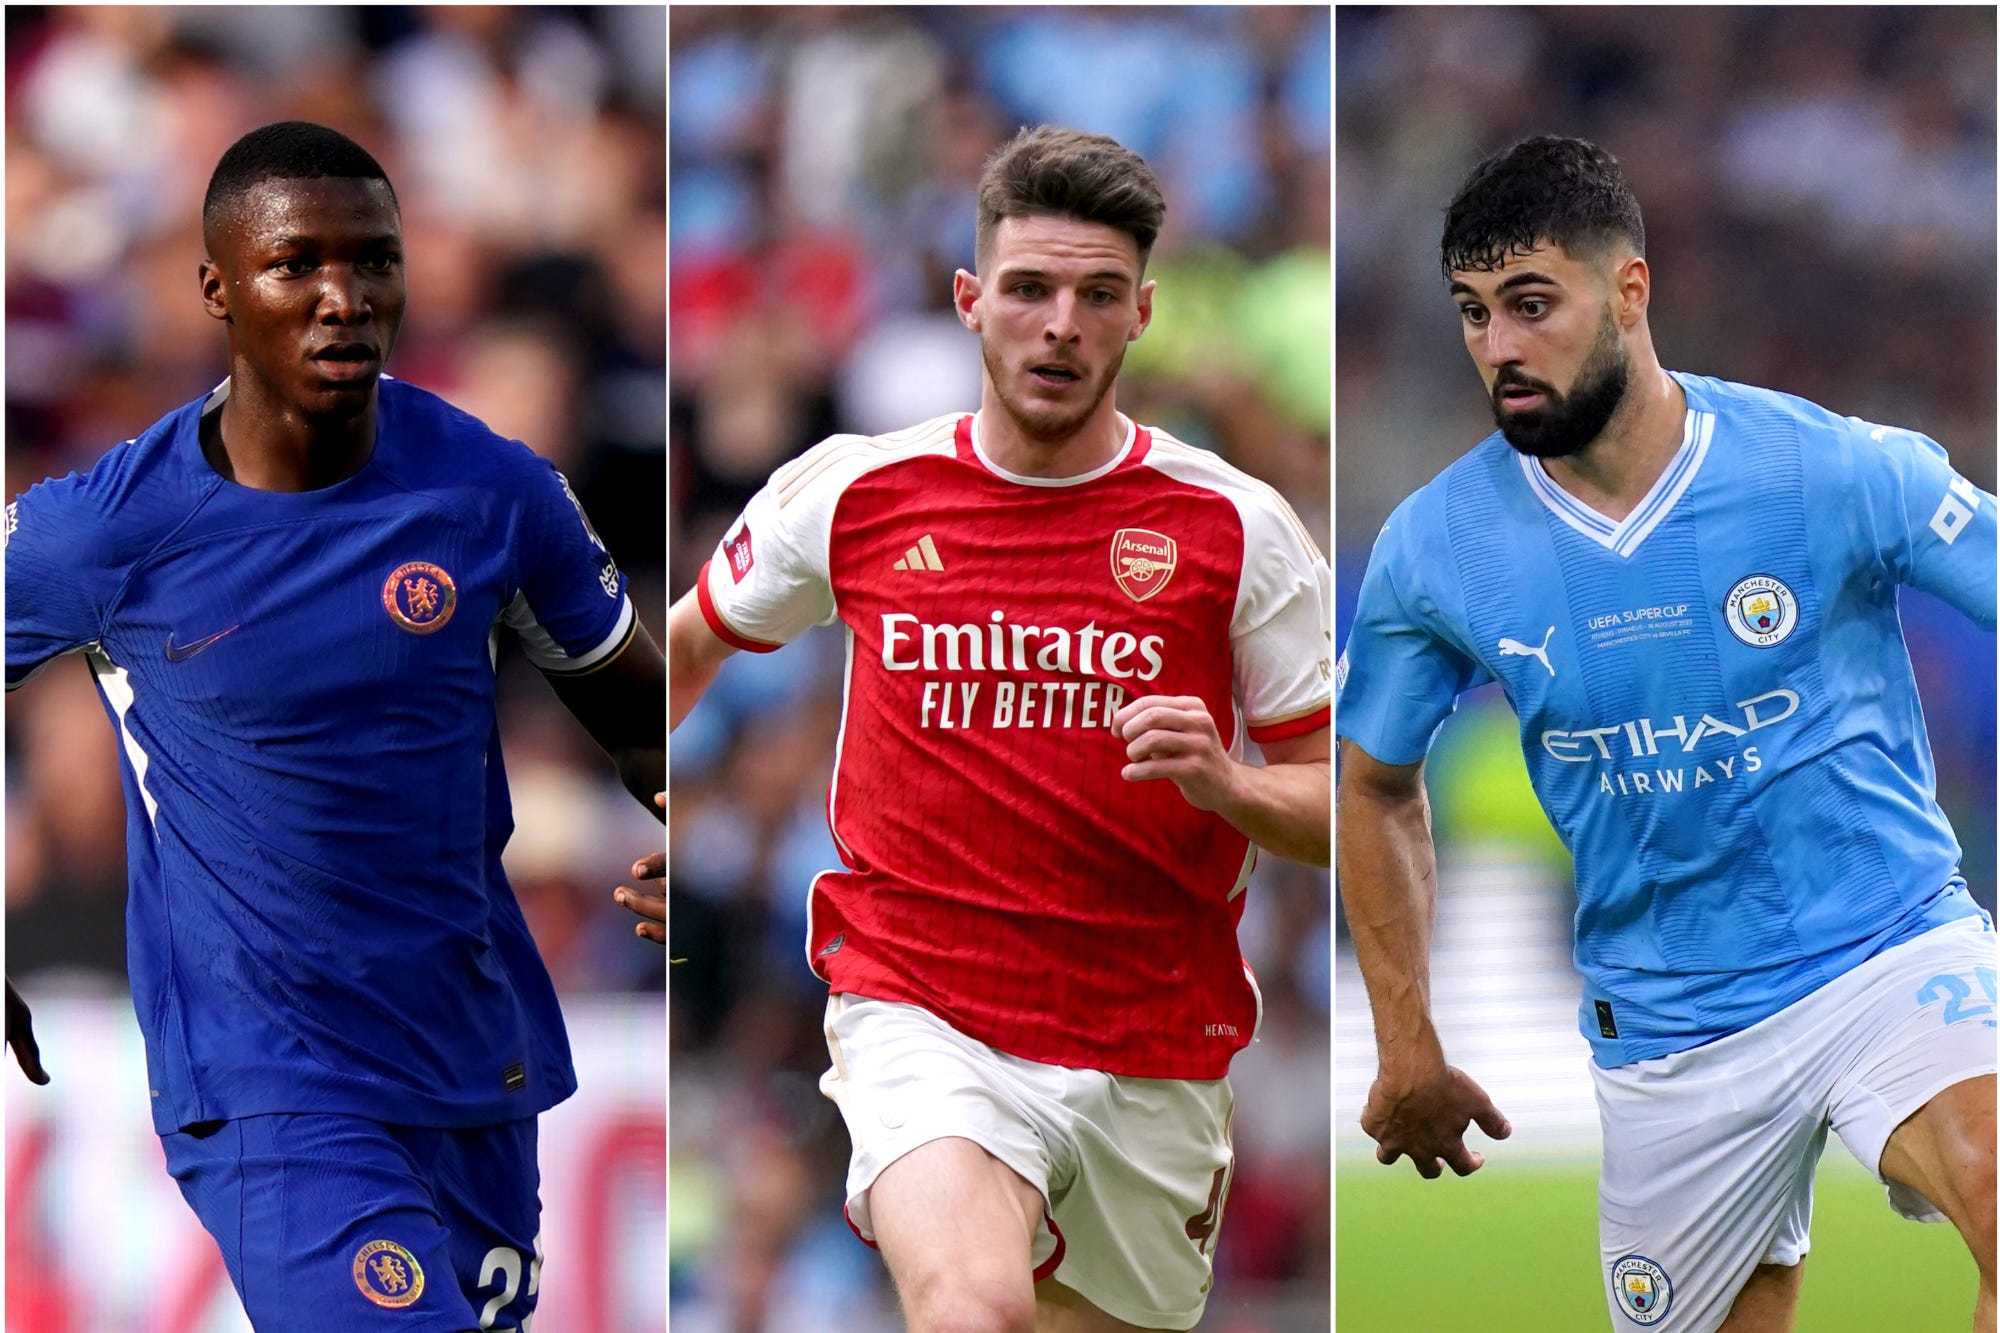 Moises Caicedo, Declan Rice and Josko Gvardiol (left to right) are the highest-priced Premier League signings this summer (John Walton/Adam Davy/PA)